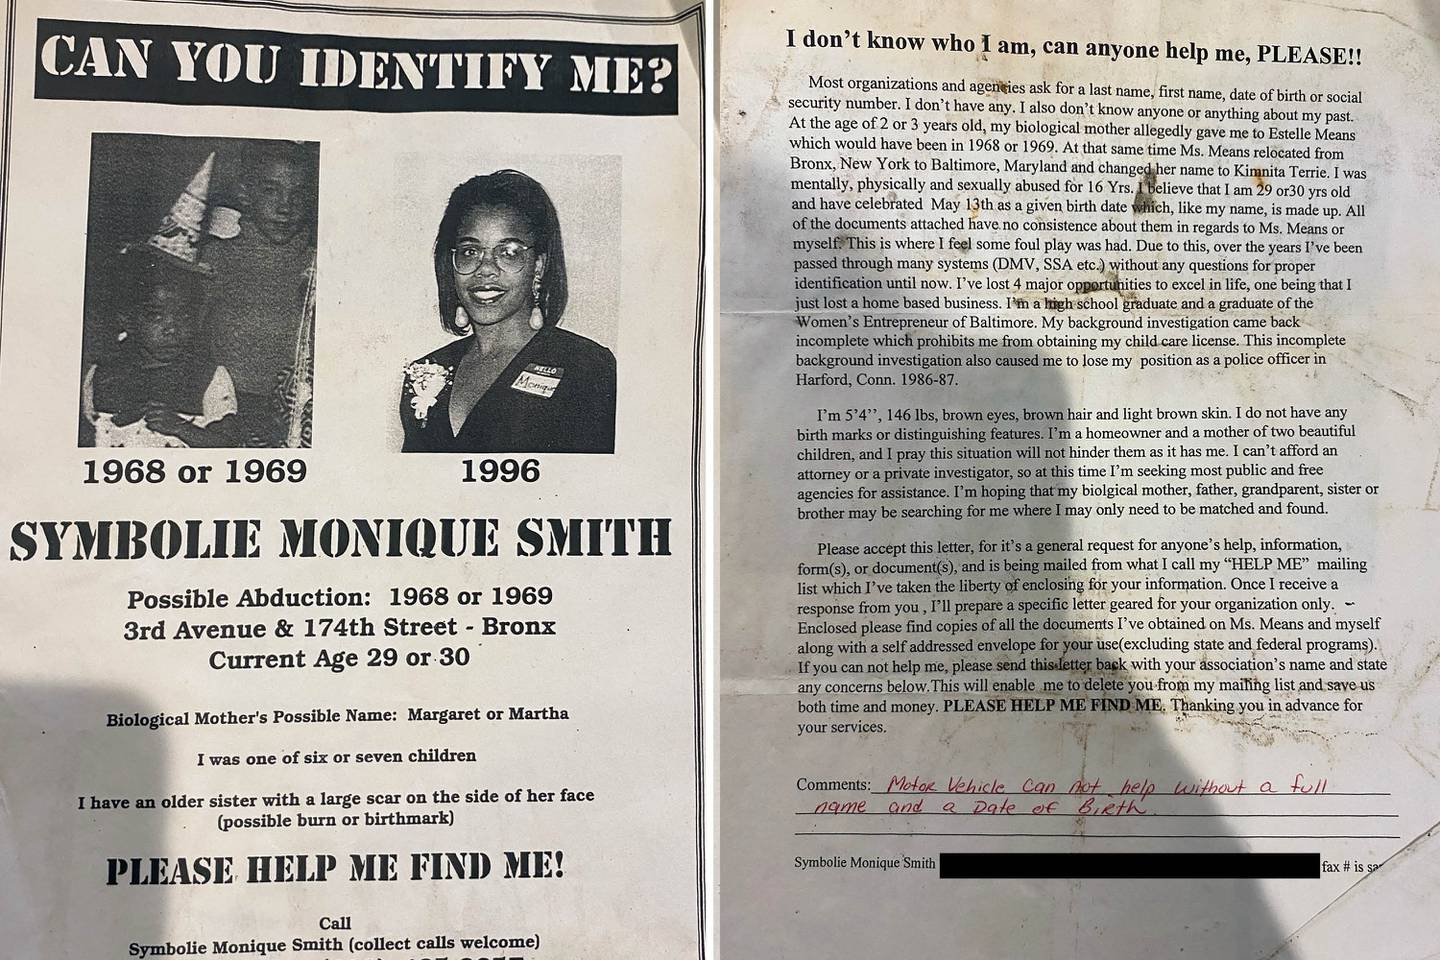 Handmade flyers, created by Monique Smith, to help her figure out her identity.